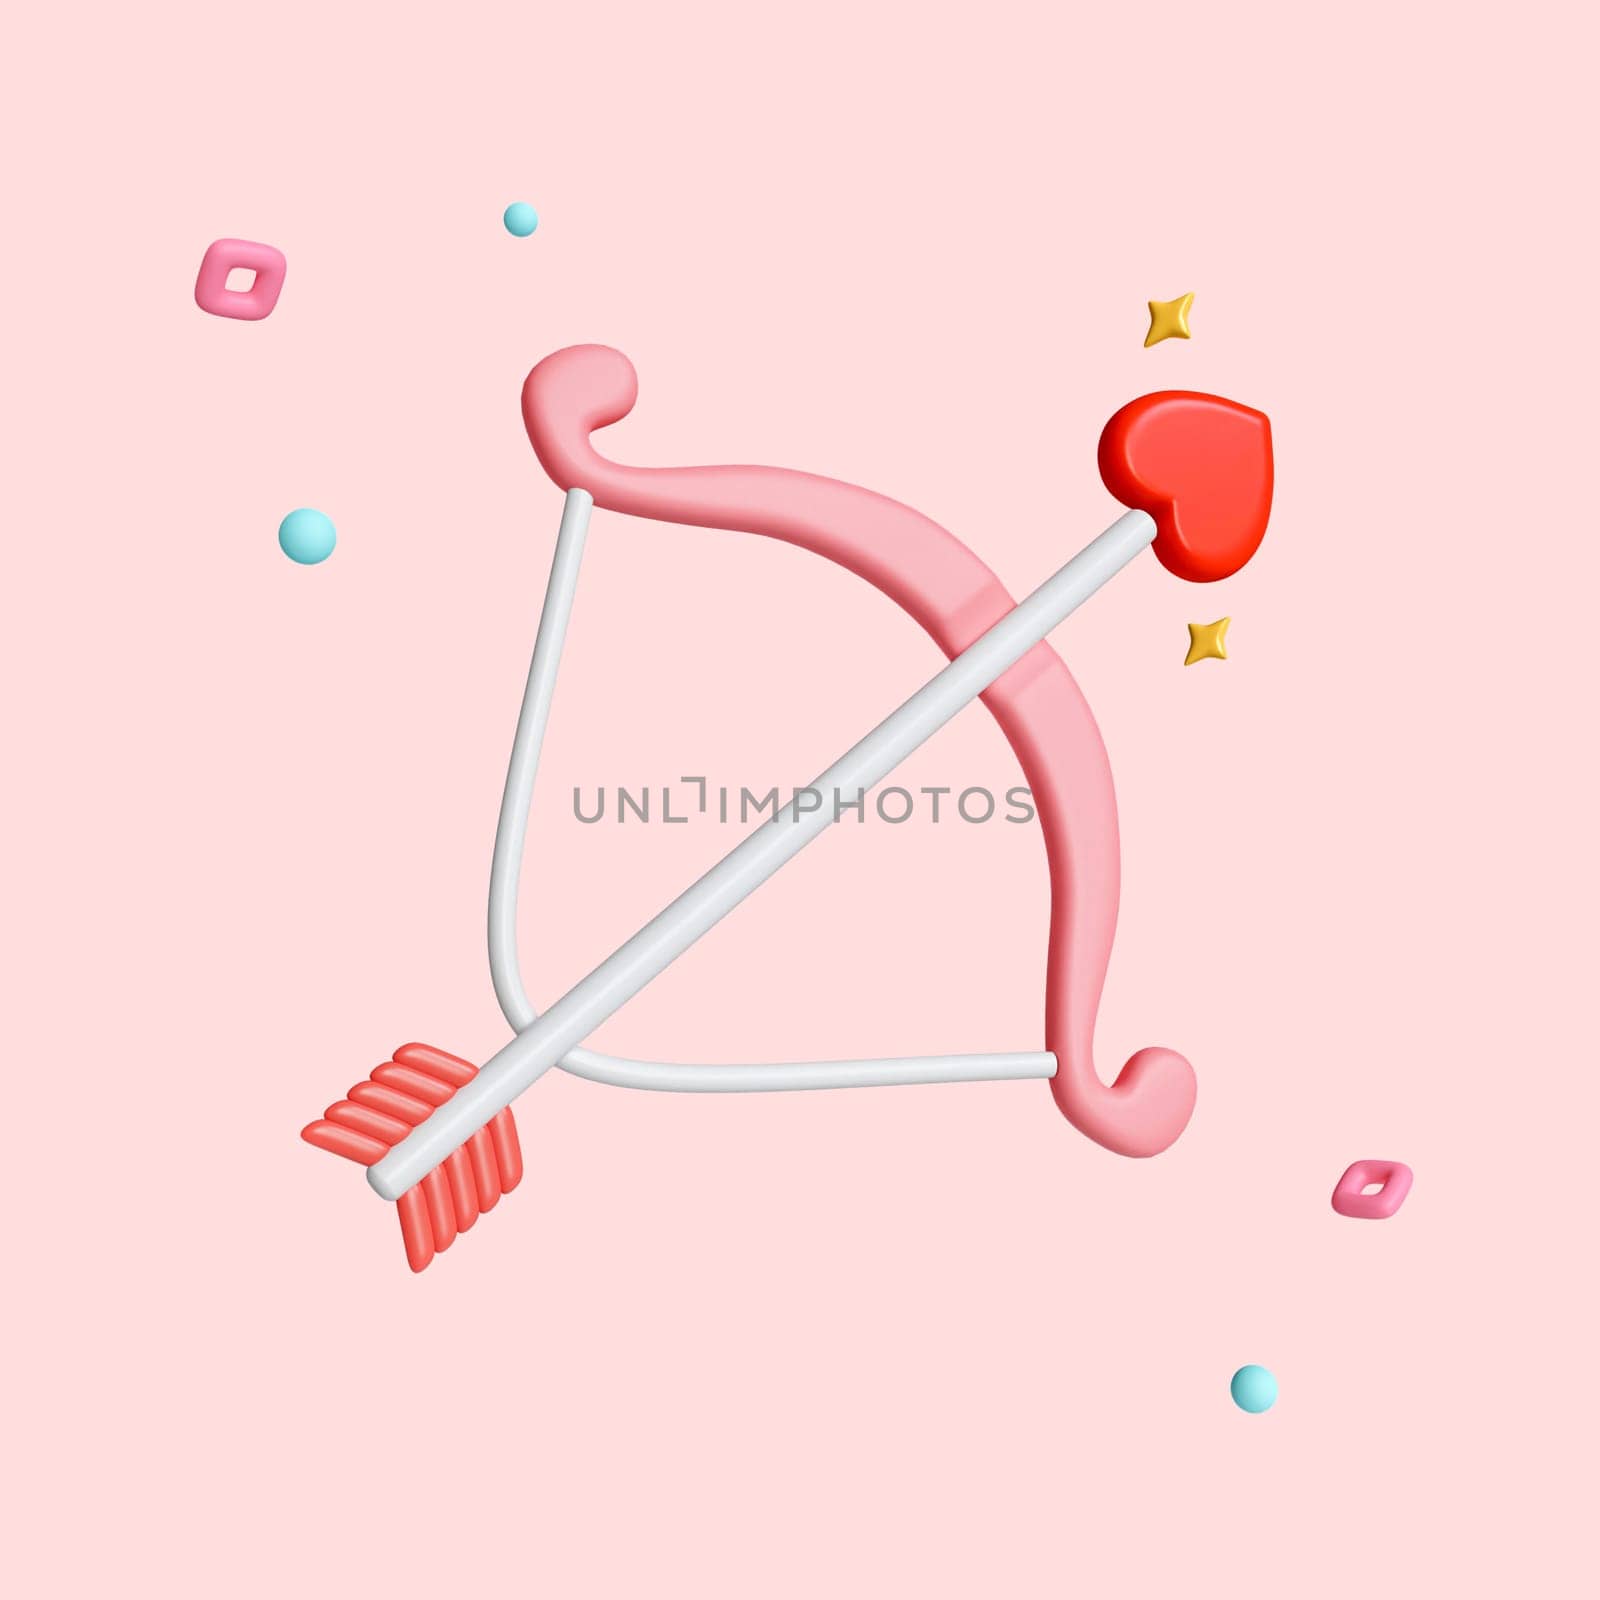 Cupid bow with heart love arrow icon Isolated on pink background with clipping path. Valentine's Day concept 3d render illustration by meepiangraphic